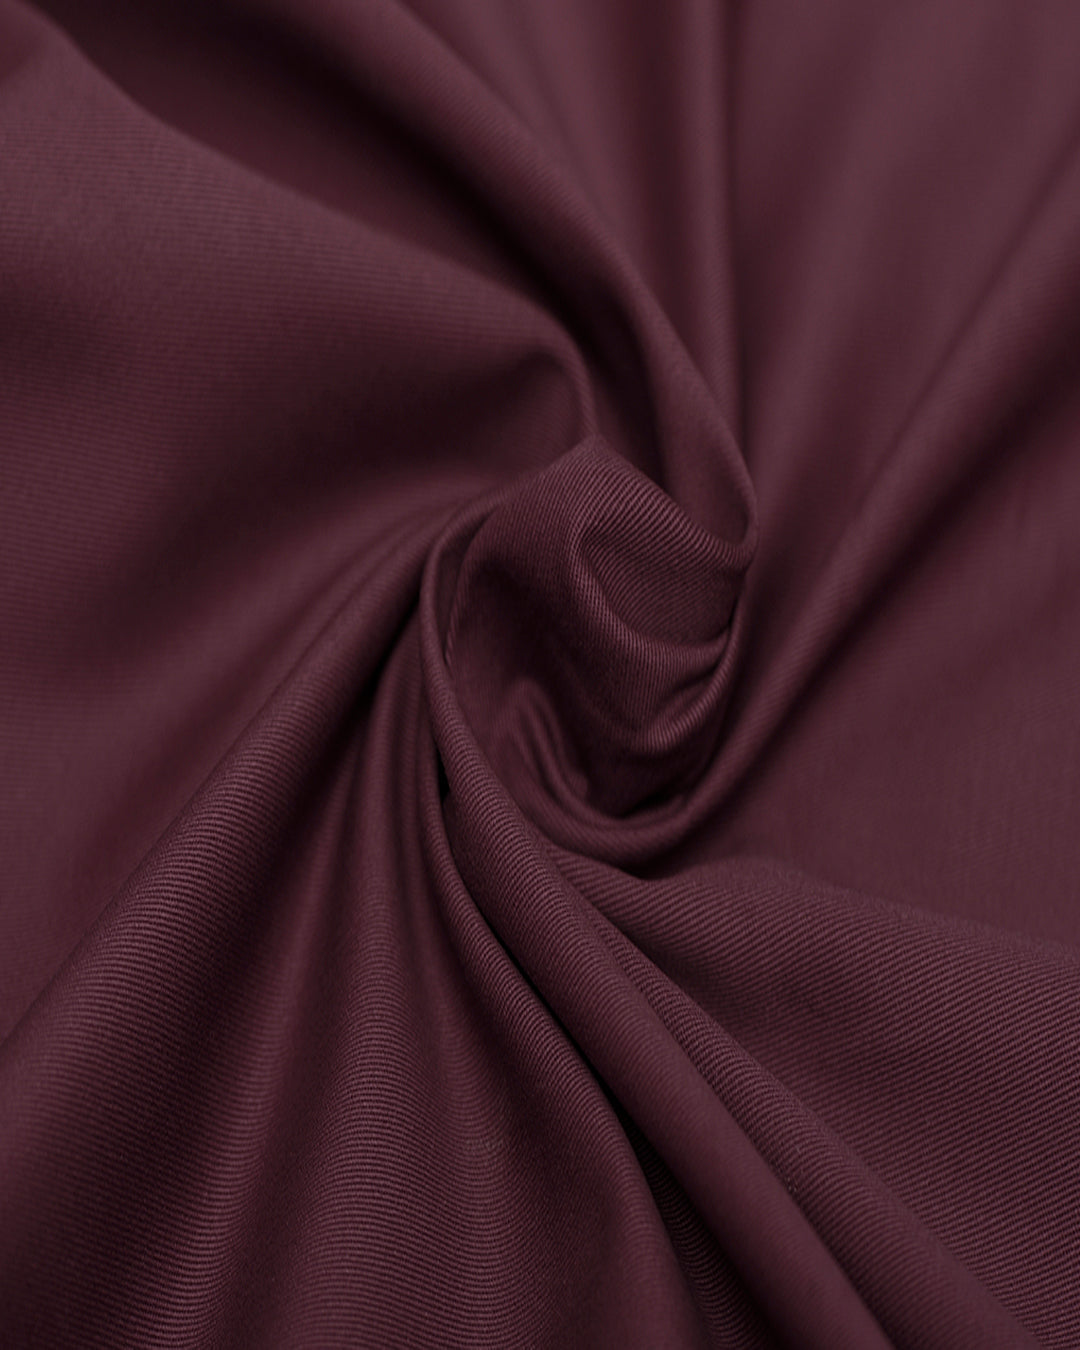 Closeup view of custom Genoa Chino pants for men by Luxire in plum